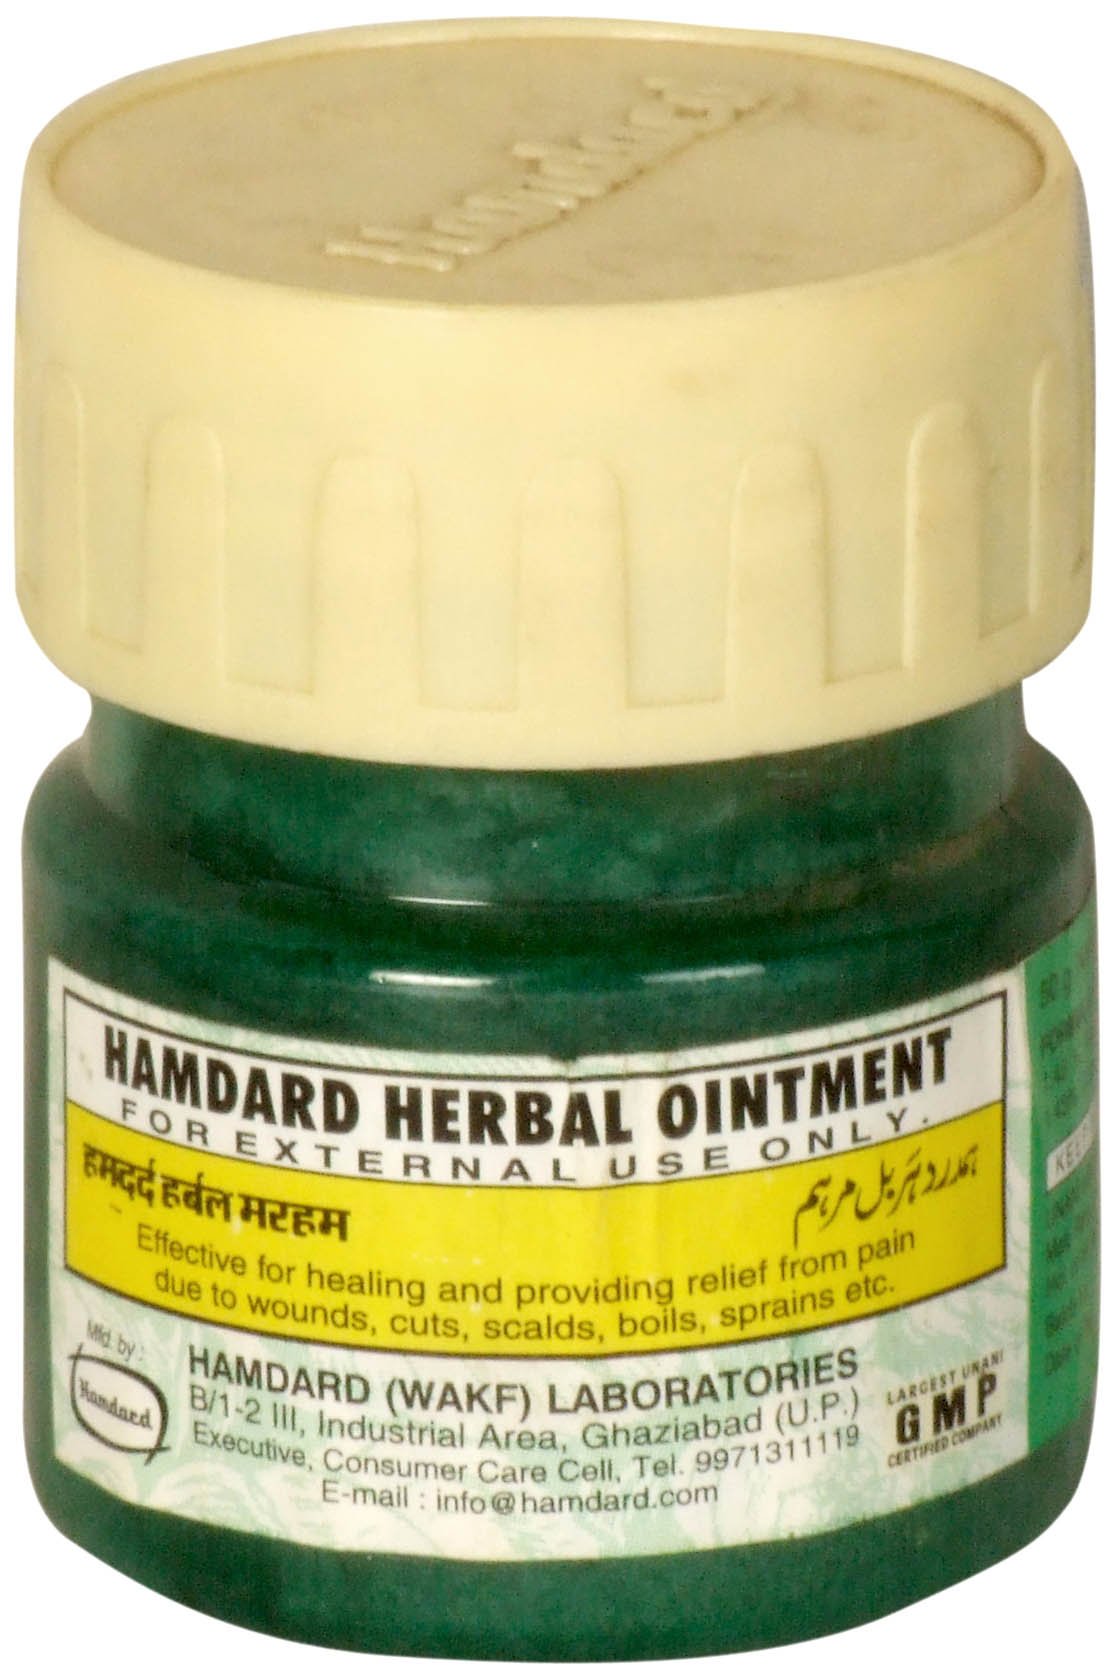 Hamdard Herbal Ointment (For External Use Only) - book cover